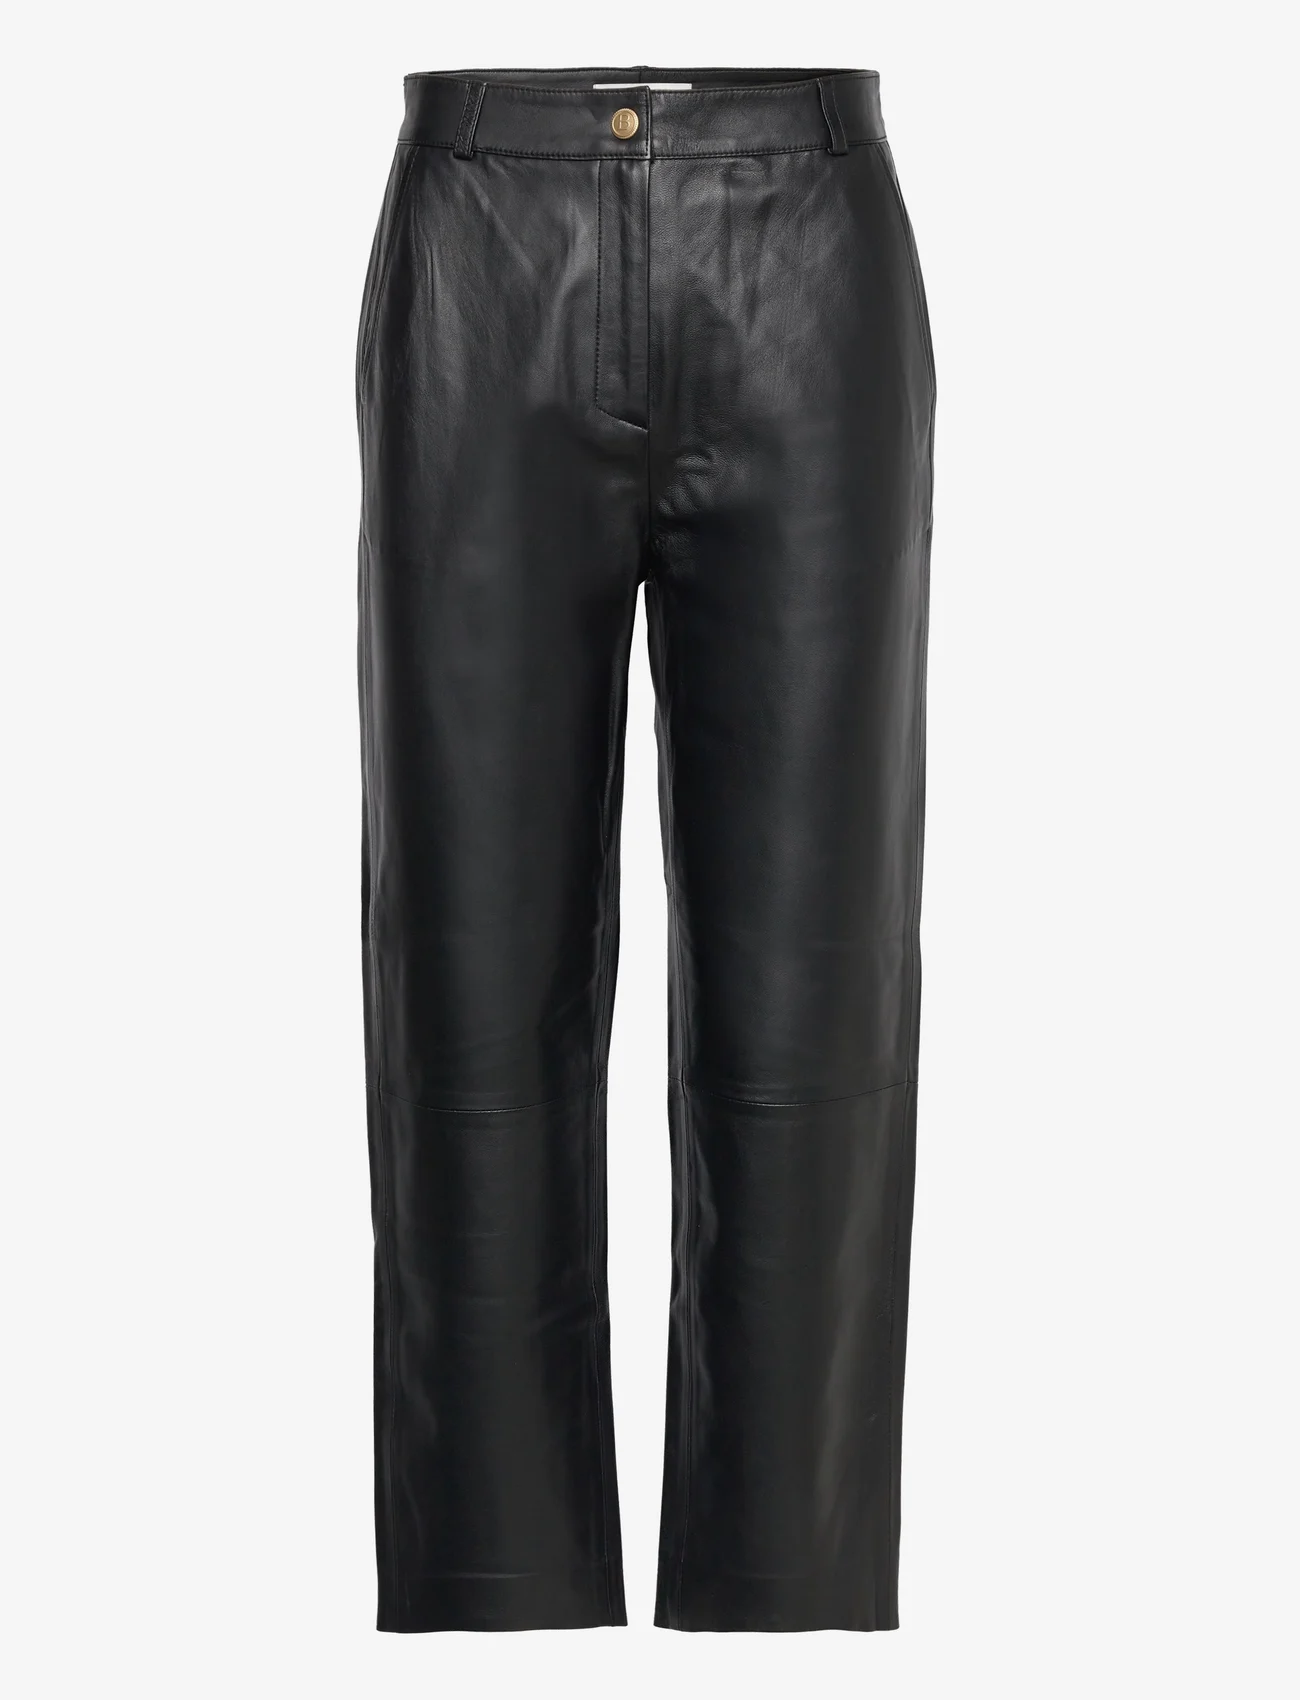 BUSNEL - ANDIE leather trousers - peoriided outlet-hindadega - black - 0